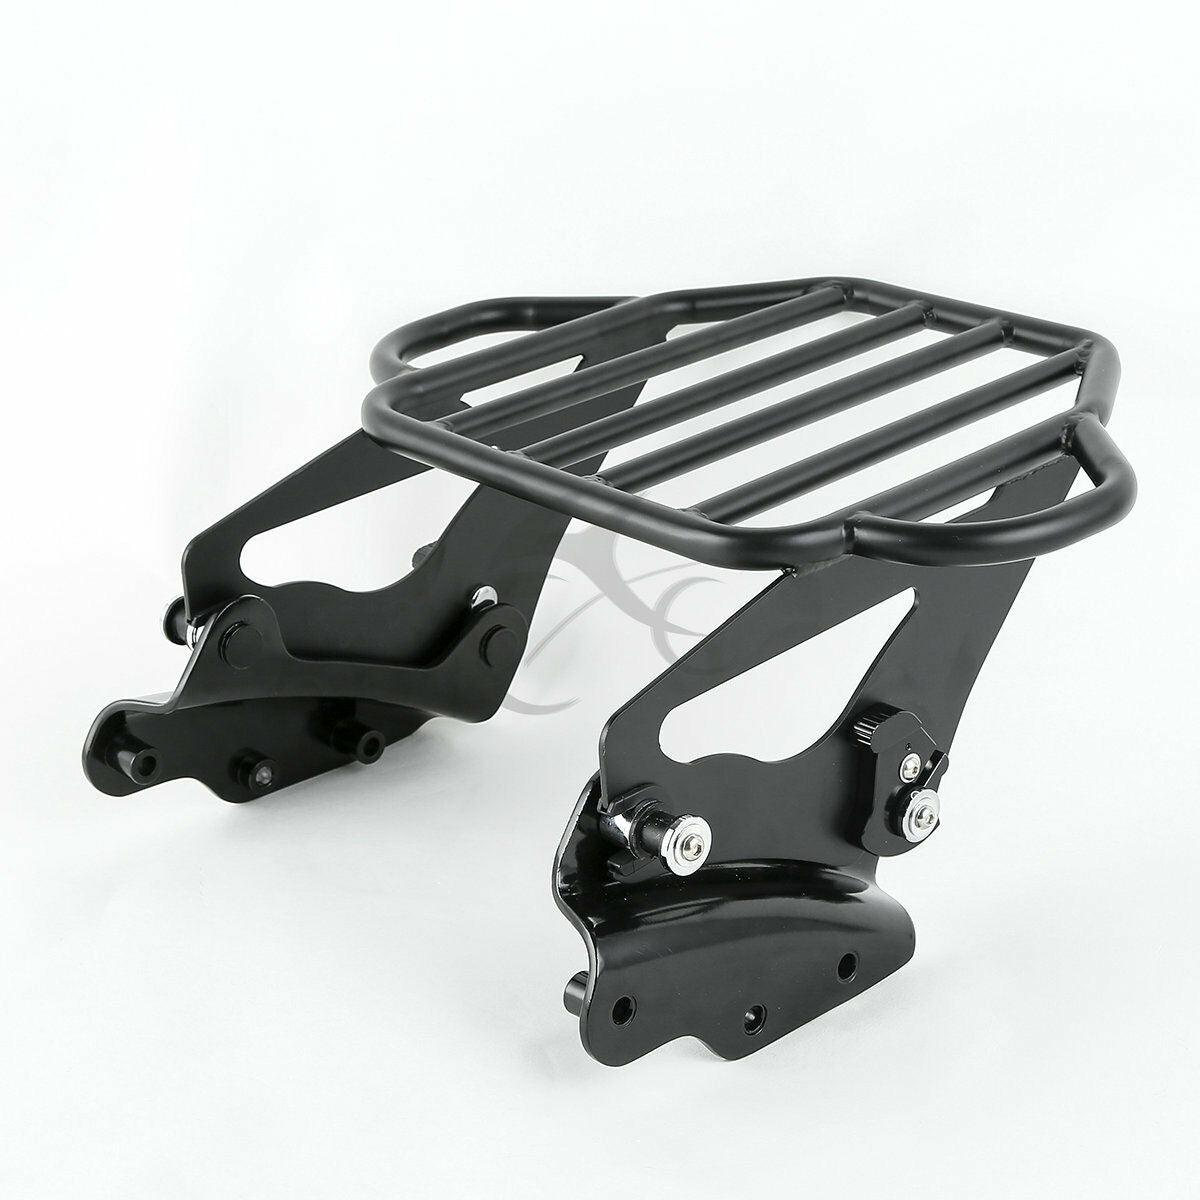 Luggage Rack 4 Point Docking Kit Fit For Harley Touring Electra Glide 2009-2013 - Moto Life Products